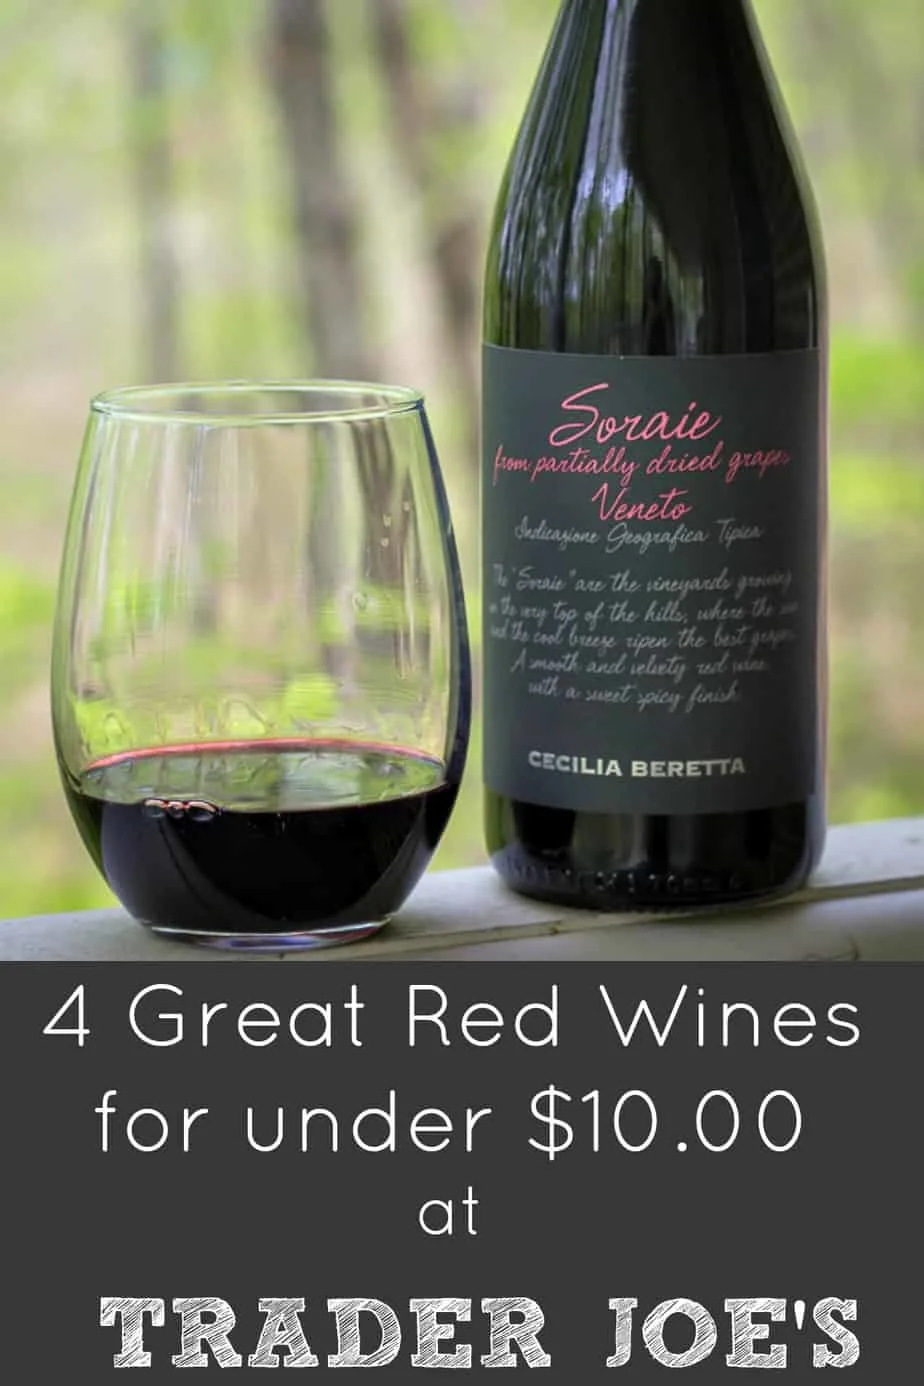 Four Good Affordable Red Wines at Trader Joe's